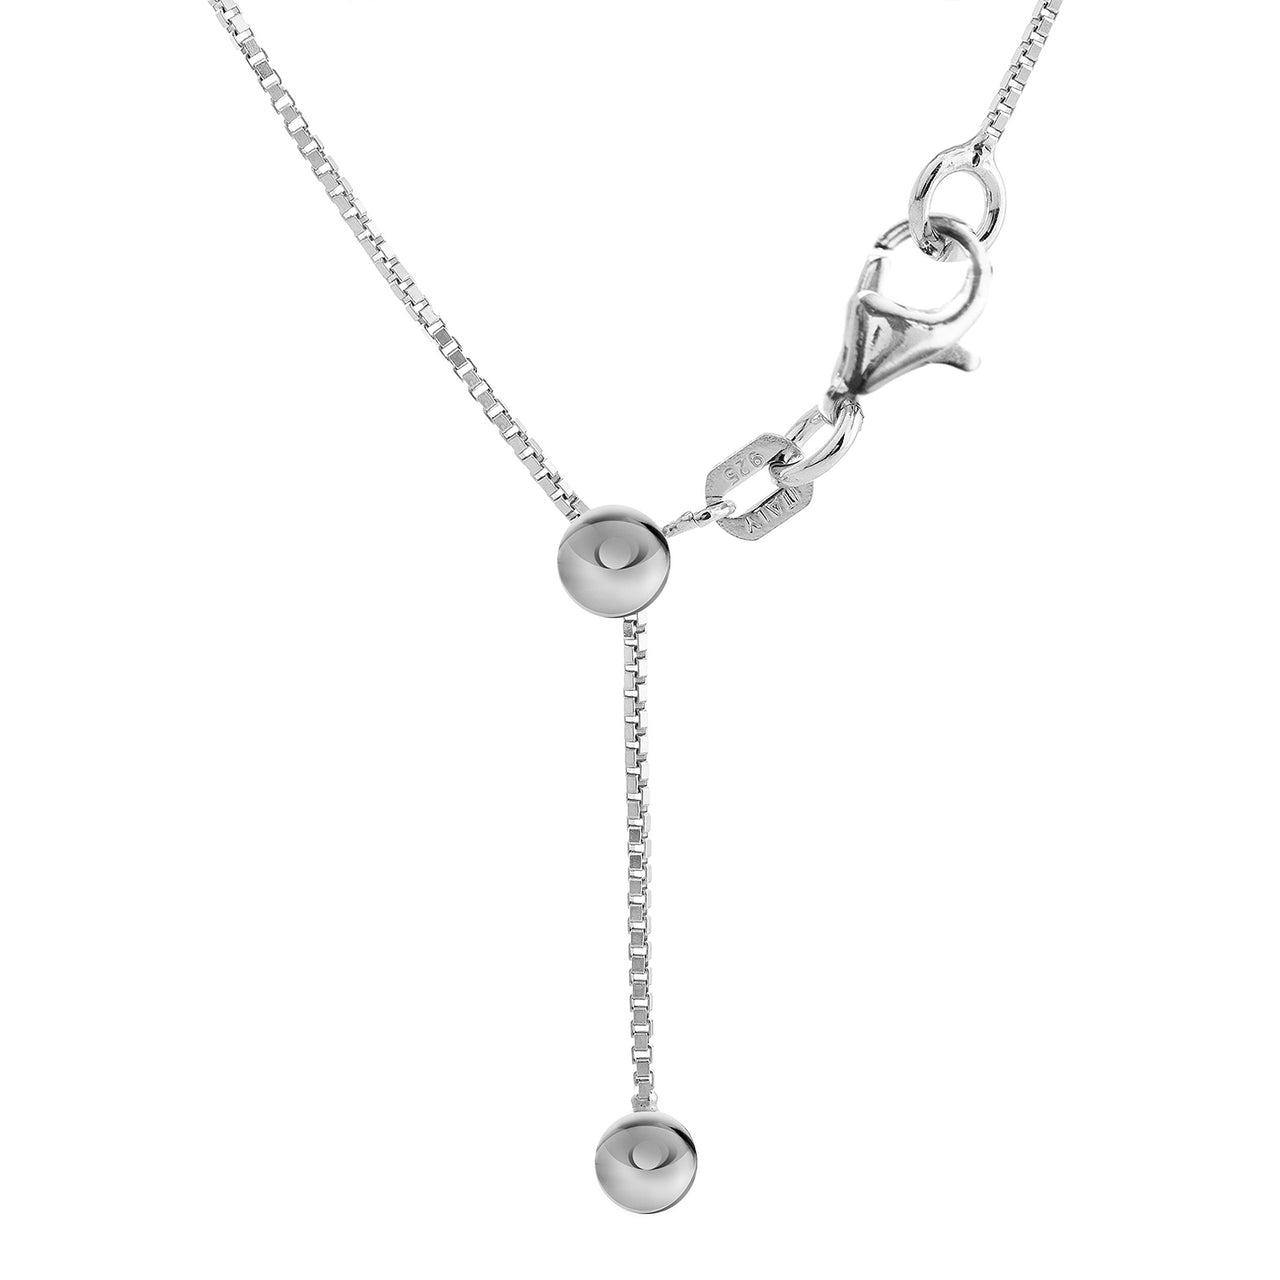 Lesa Michele Rhodium Plated Sterling Silver 24" Box Chain Necklace